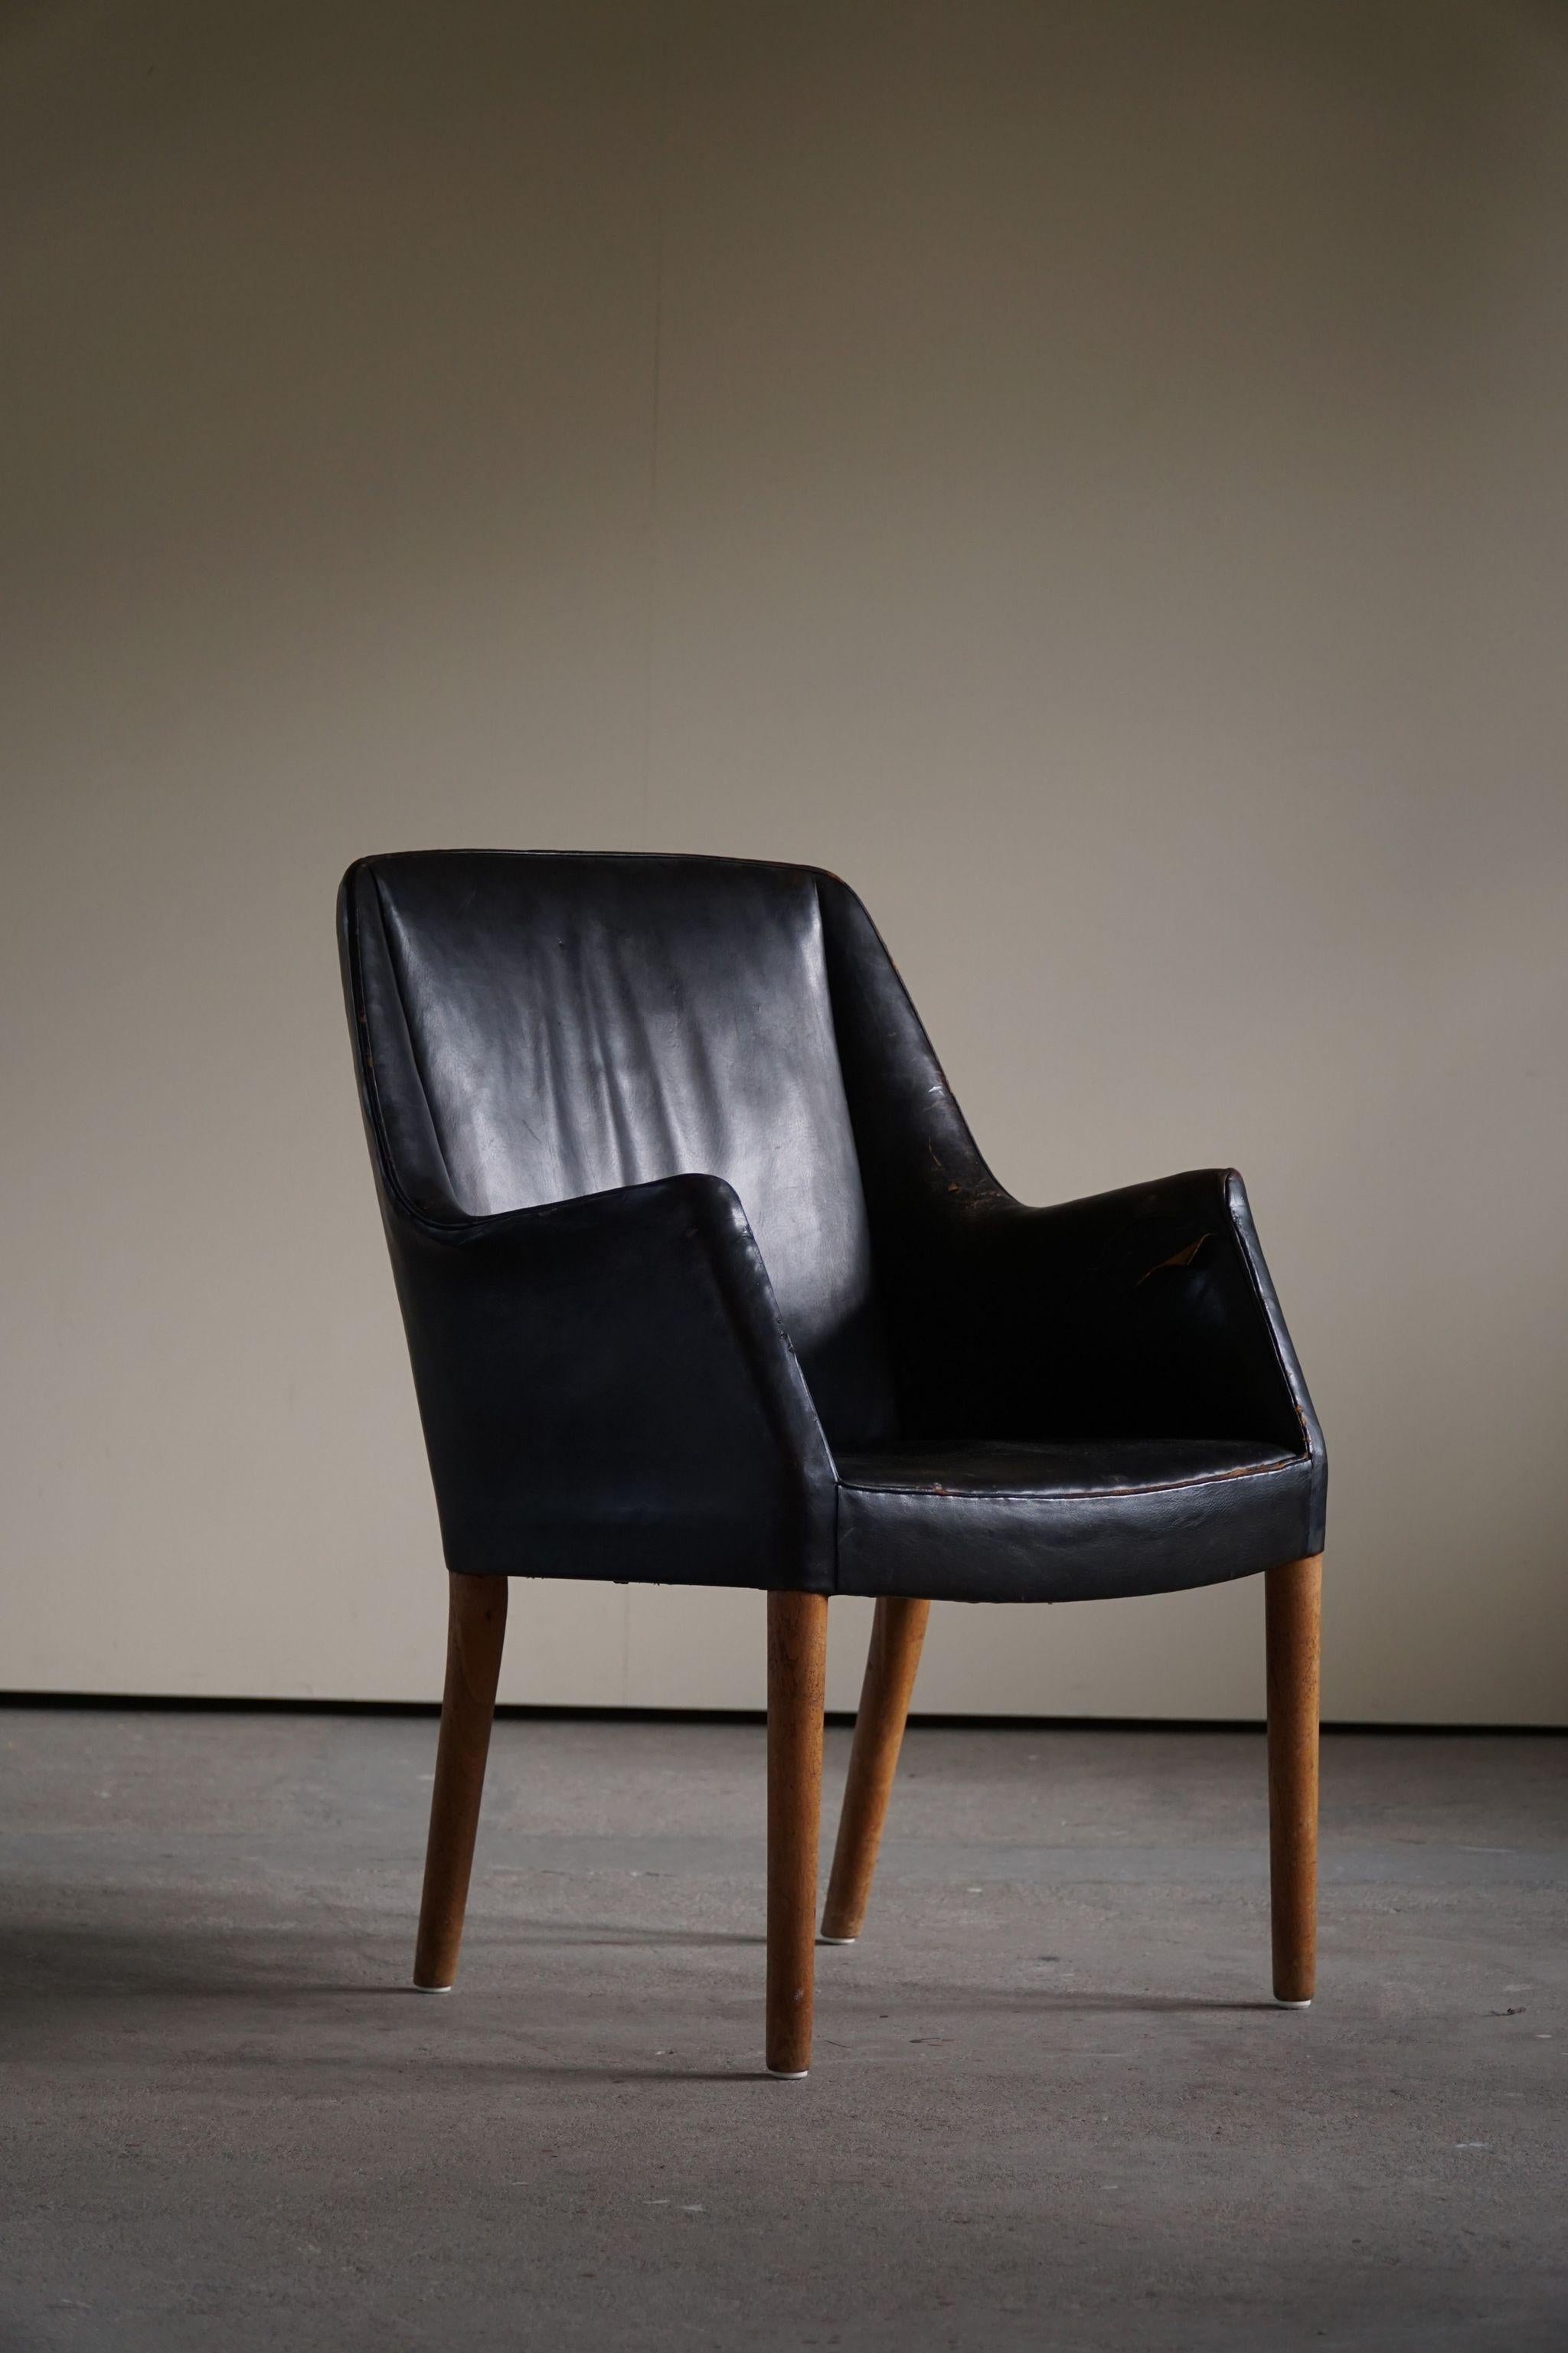 Danish Modern Armchair by Nanna Ditzel in Oak and Patinated Leather, 1950s For Sale 7